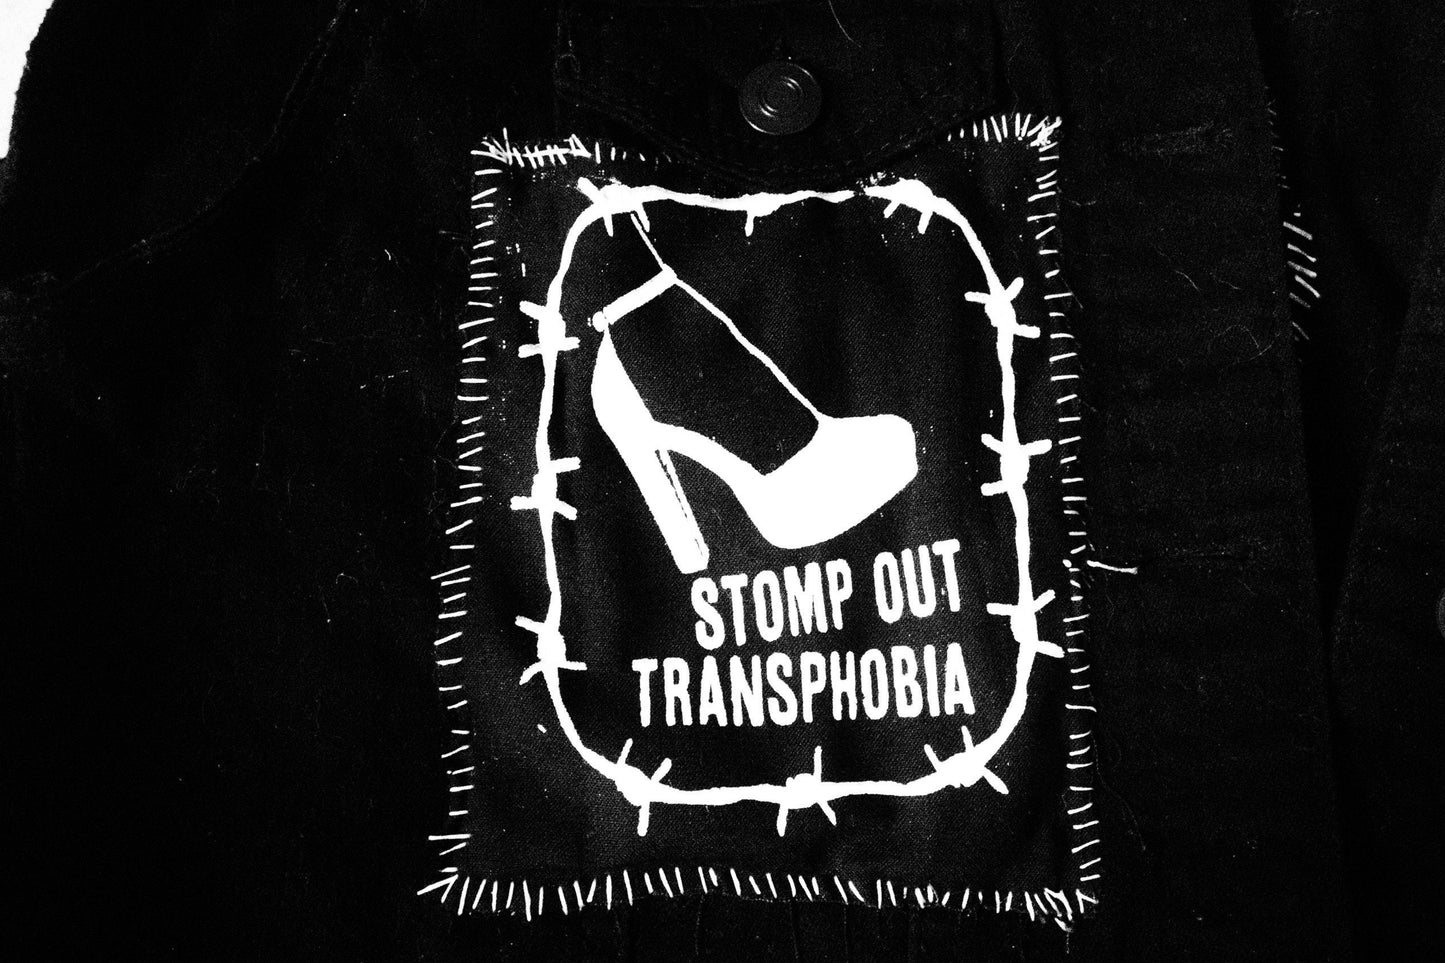 Stomp Out Transphobia Patch